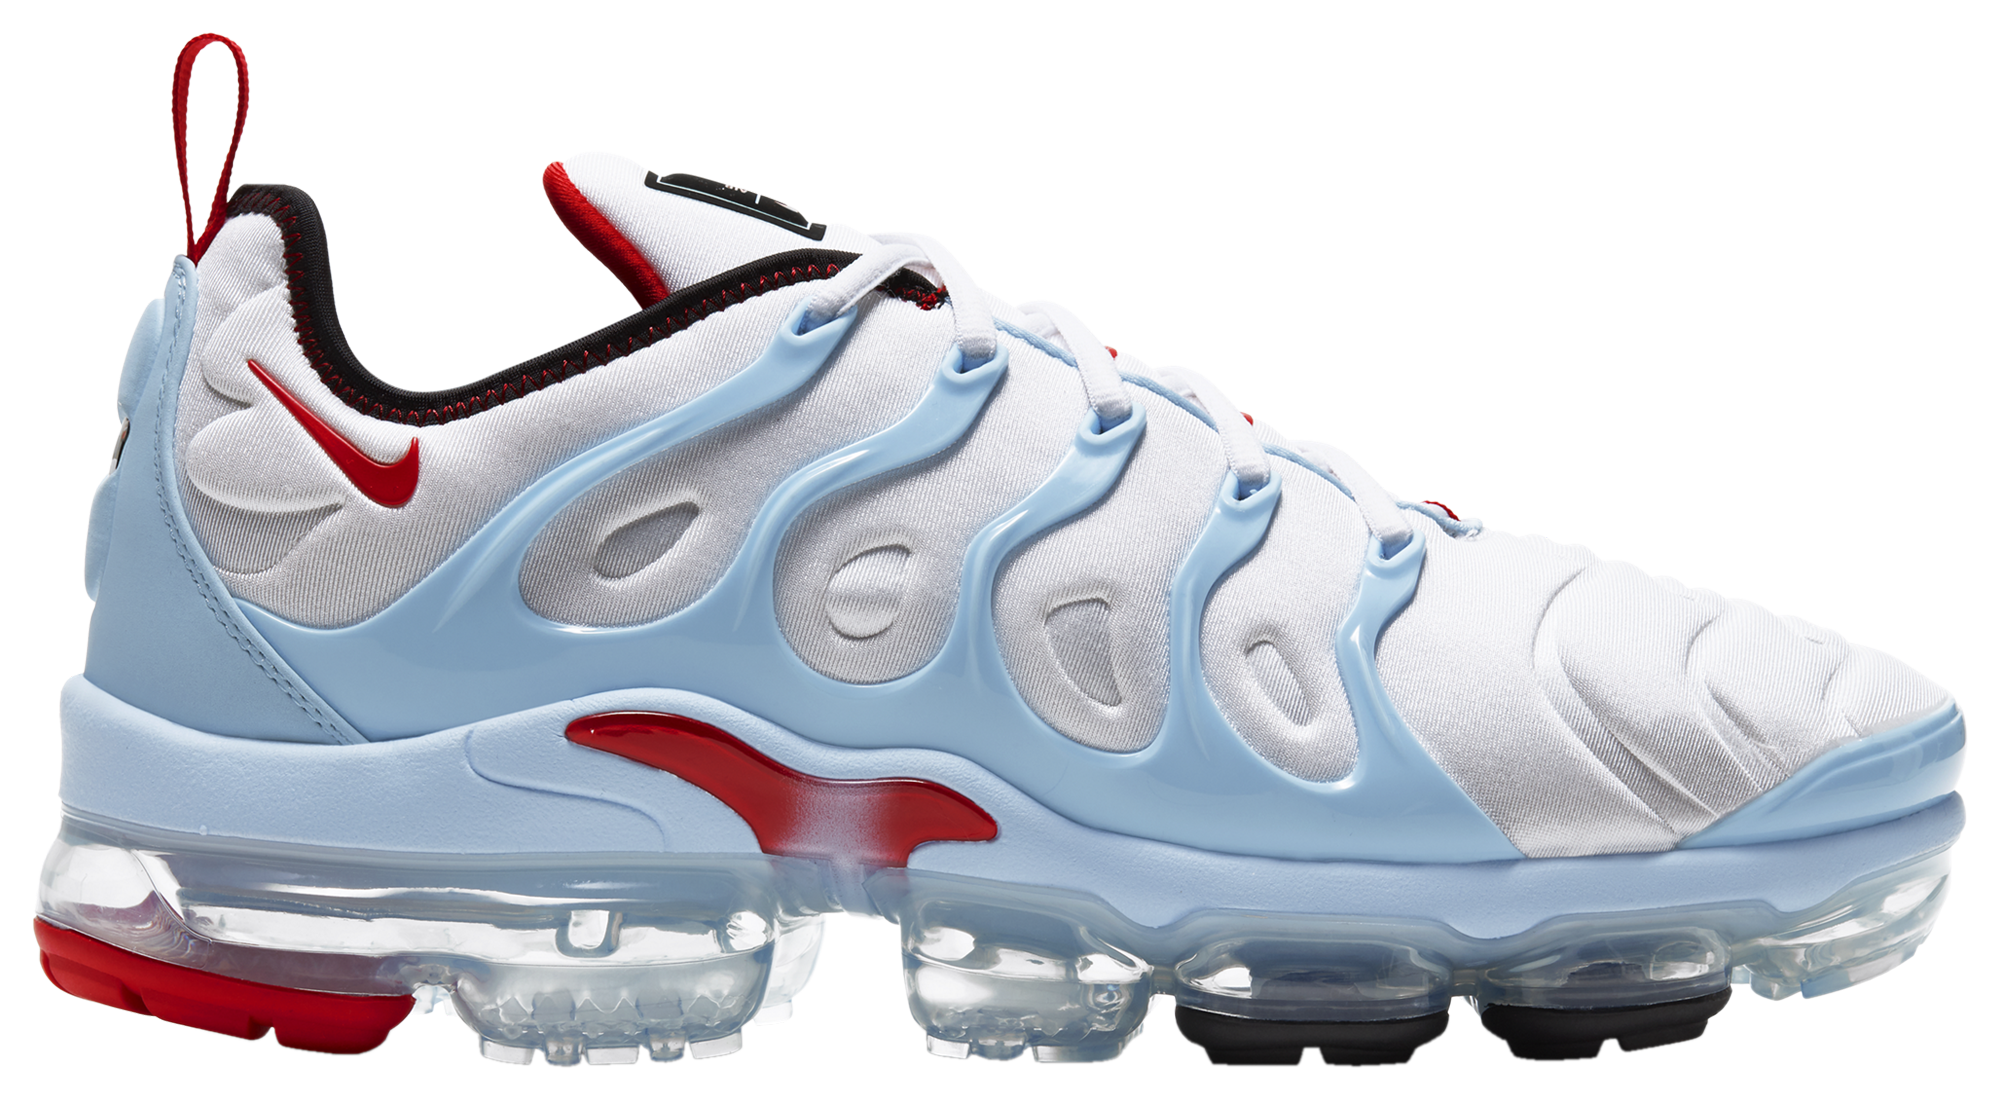 The Nike VaporMax Plus Just Dropped in Two Colorful